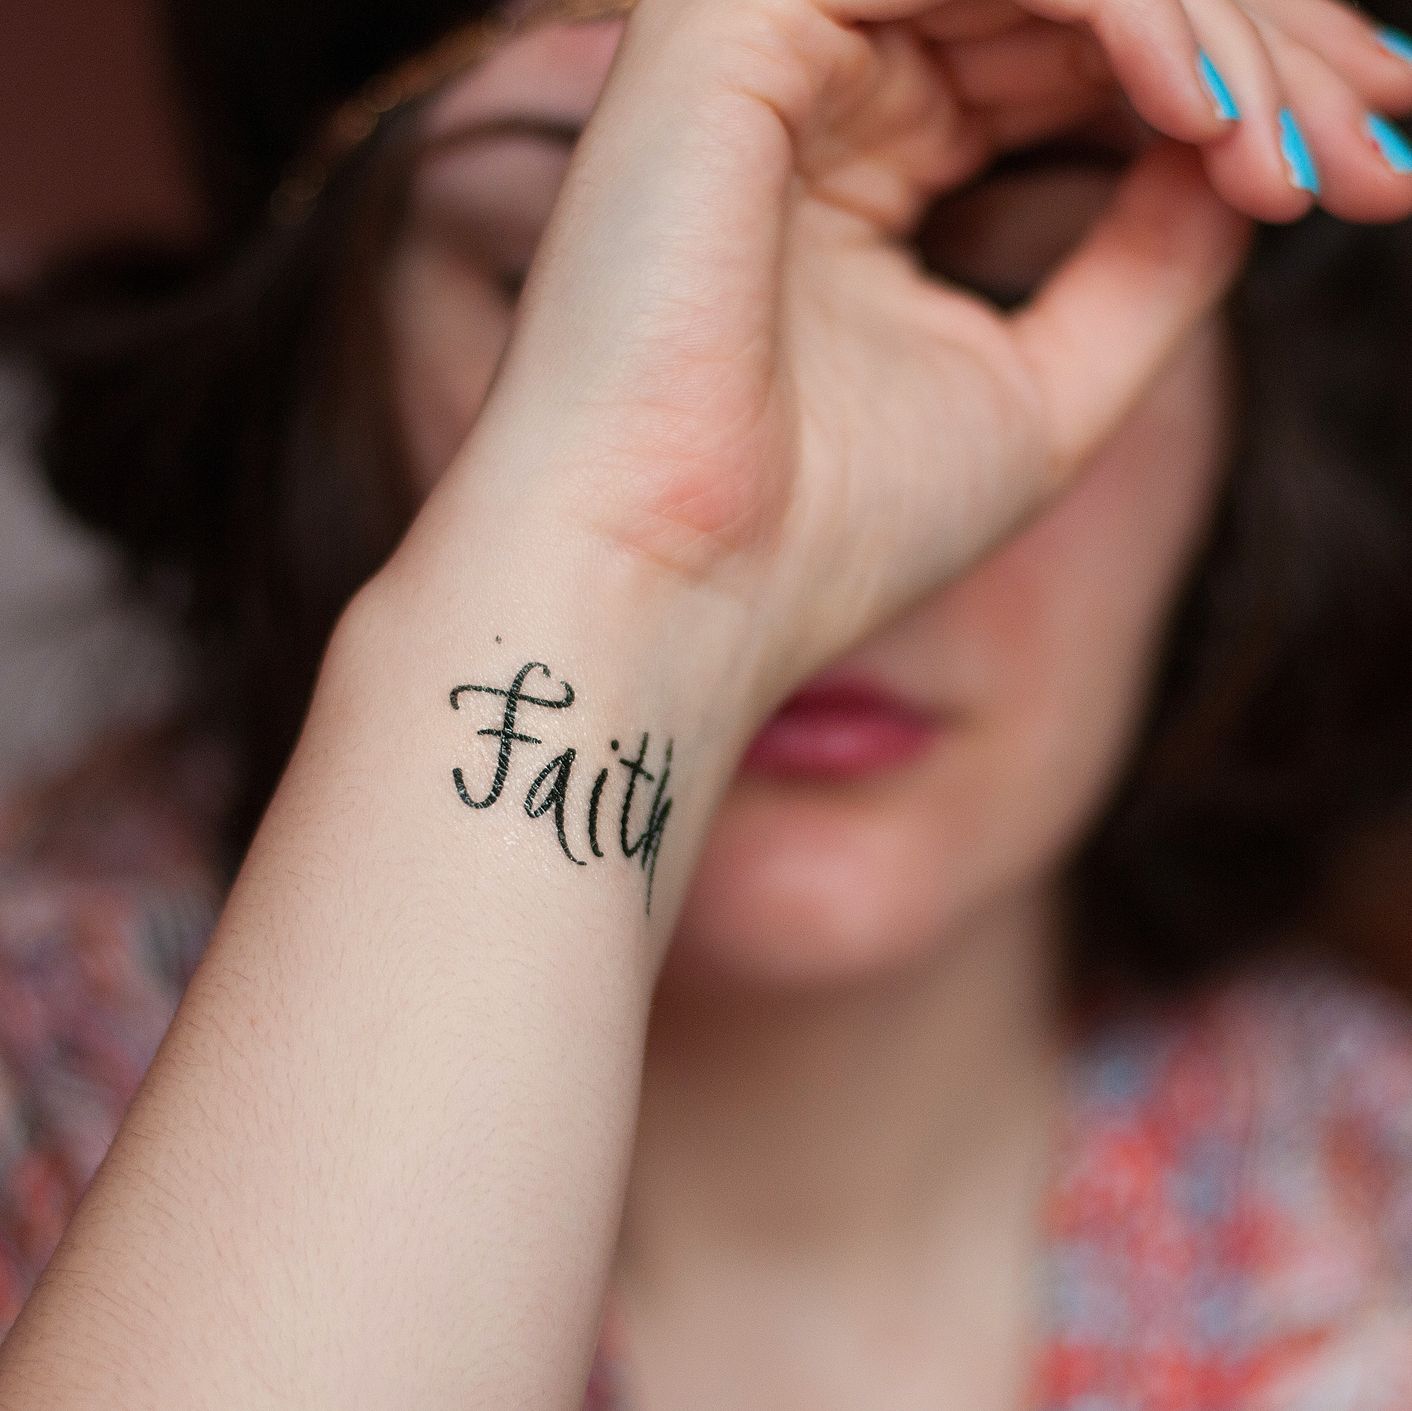 greek word tattoos and their meanings